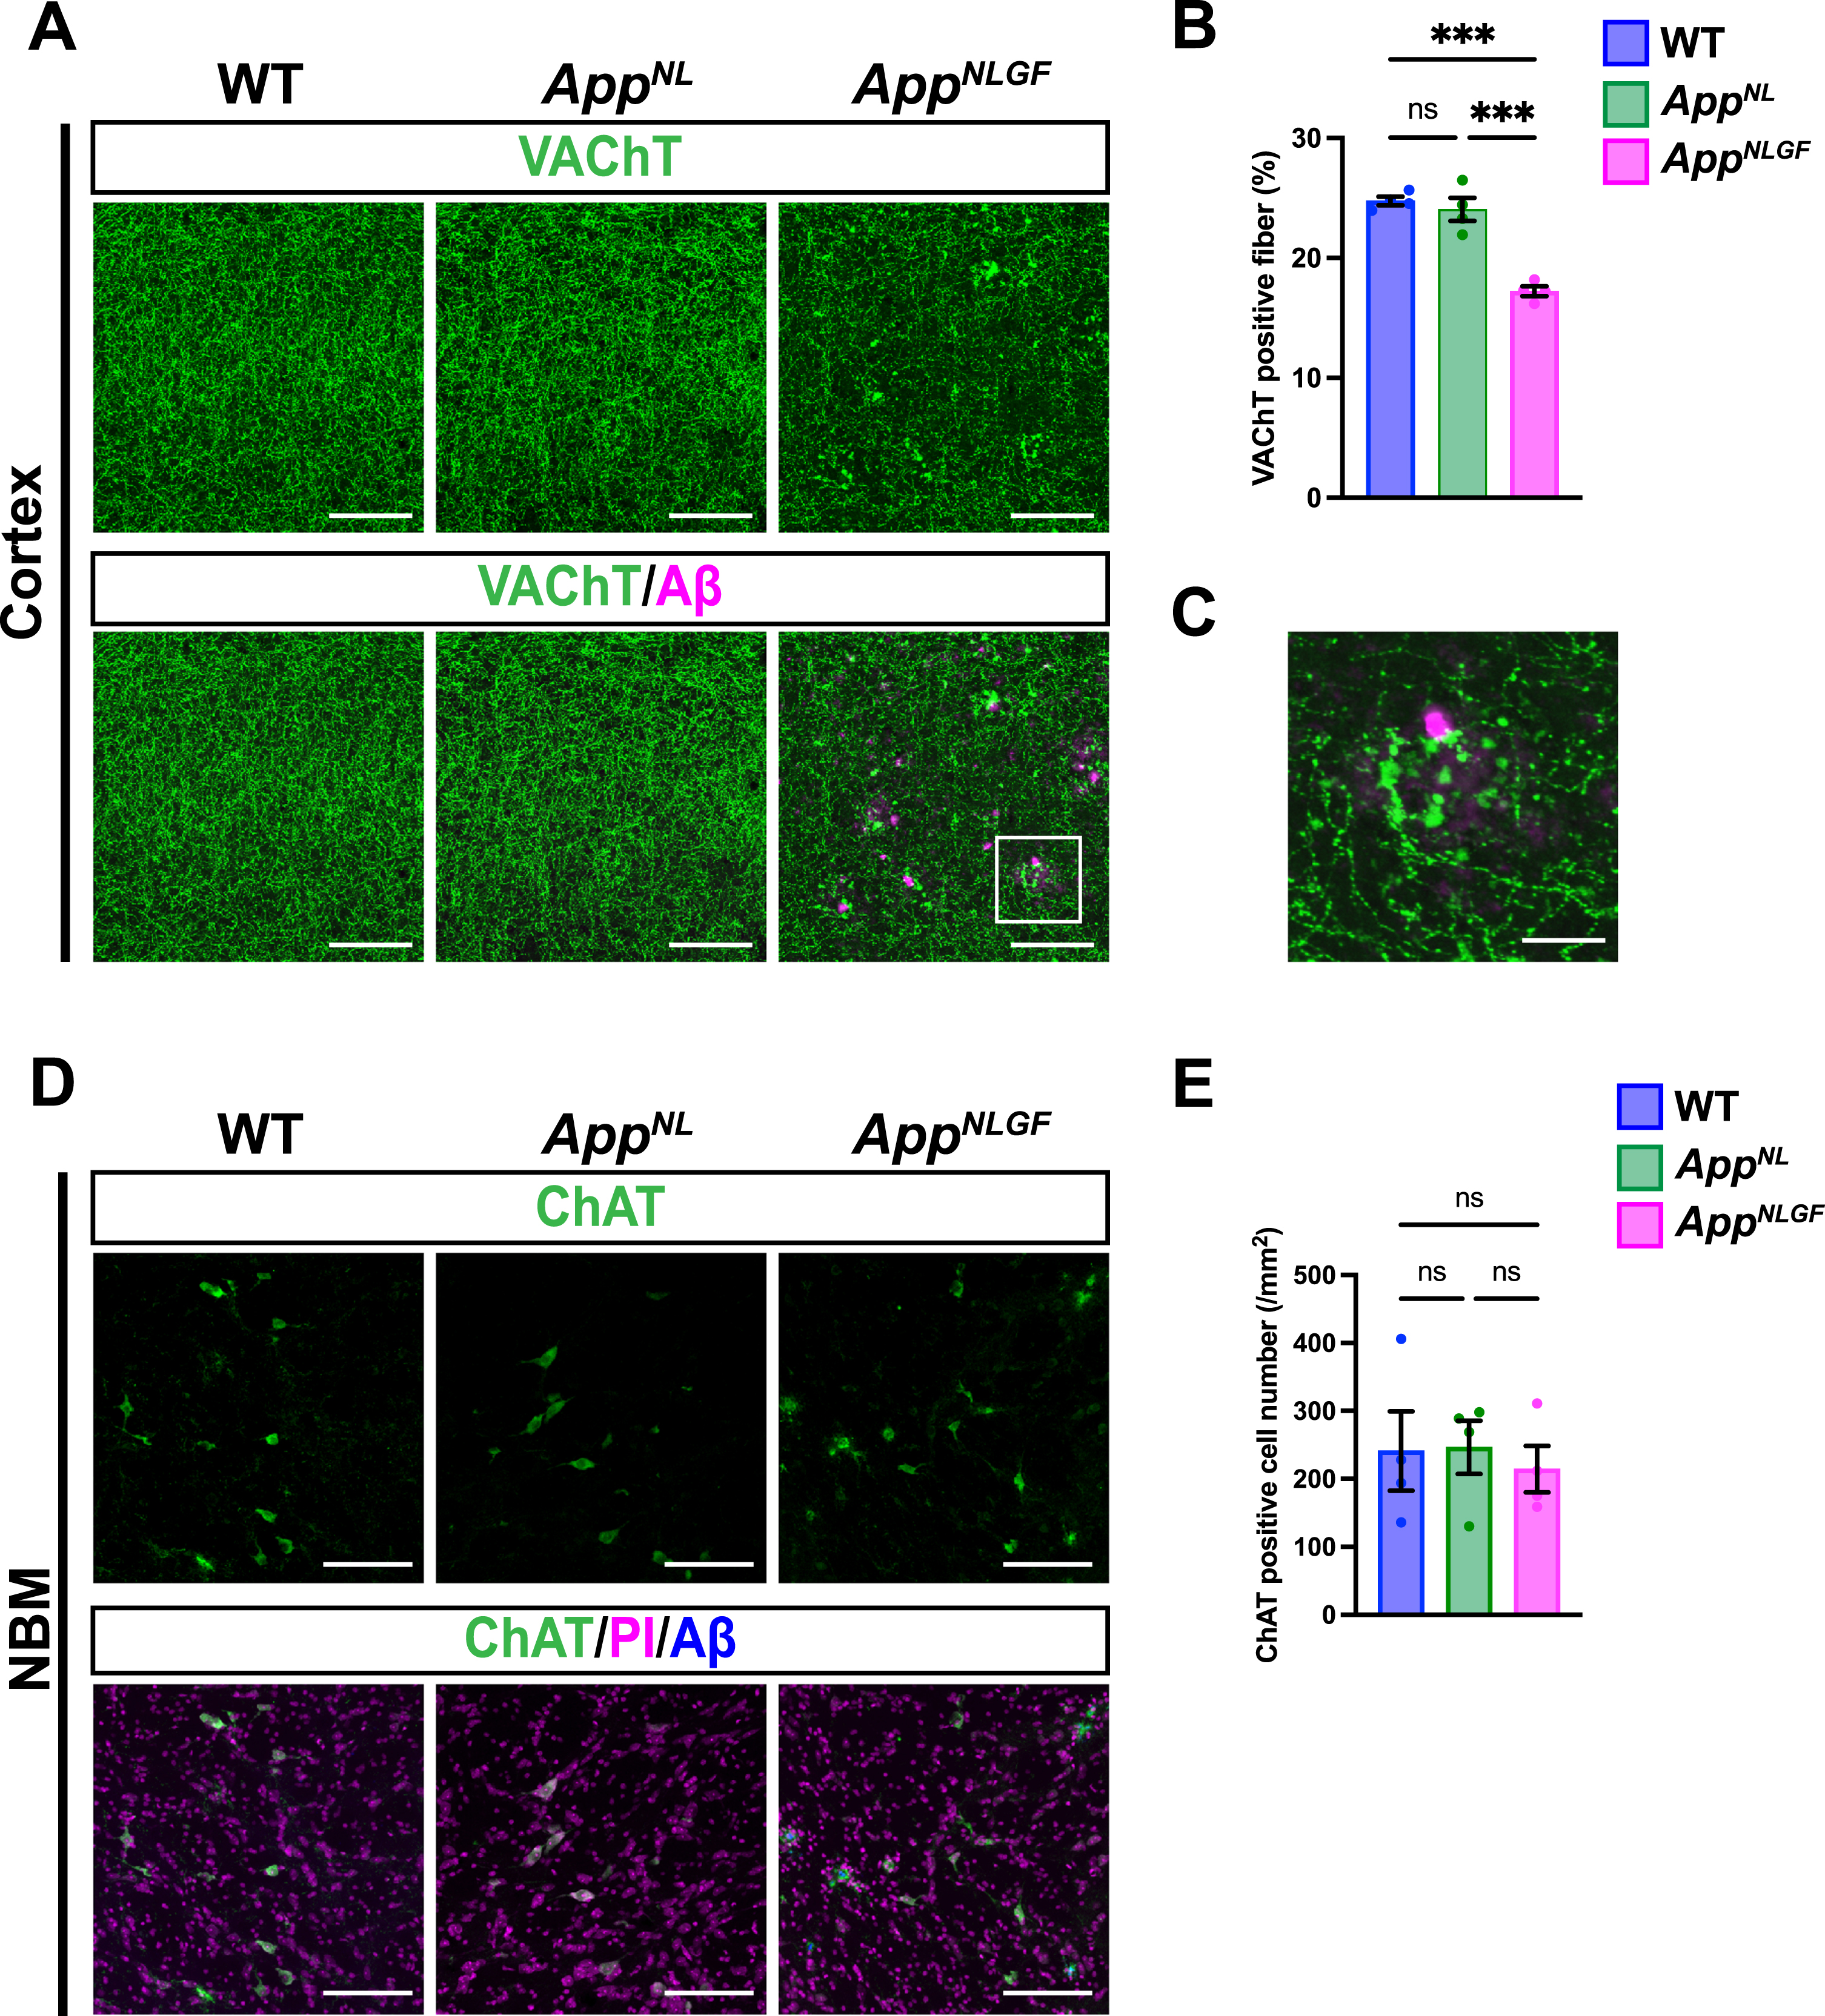 The density of cholinergic axons is significantly reduced in the cortex of AppNLGF mice. (A) Representative images of the cortex from frozen coronal brain sections immunostained with antibodies against VAChT (green). FSB was used for detecting Aβ plaques (magenta). Scale bars, 100μm. (B) VAChT immunoreactivity was quantified and expressed as positive area (%). n = 4 /group. ***p < 0.001. (C) A higher magnification of framed region indicated in A. Scale bar, 20μm. (D) Representative images of the NBM from frozen coronal brain sections immunostained with antibodies against ChAT (green) were shown (magenta indicated PI staining). FSB was used for detecting Aβ plaques (blue). (E) The number of ChAT-positive cells was counted and expressed as cell number per area (/mm2). Scale bar, 100μm. n = 4 /group. ns, not significant.